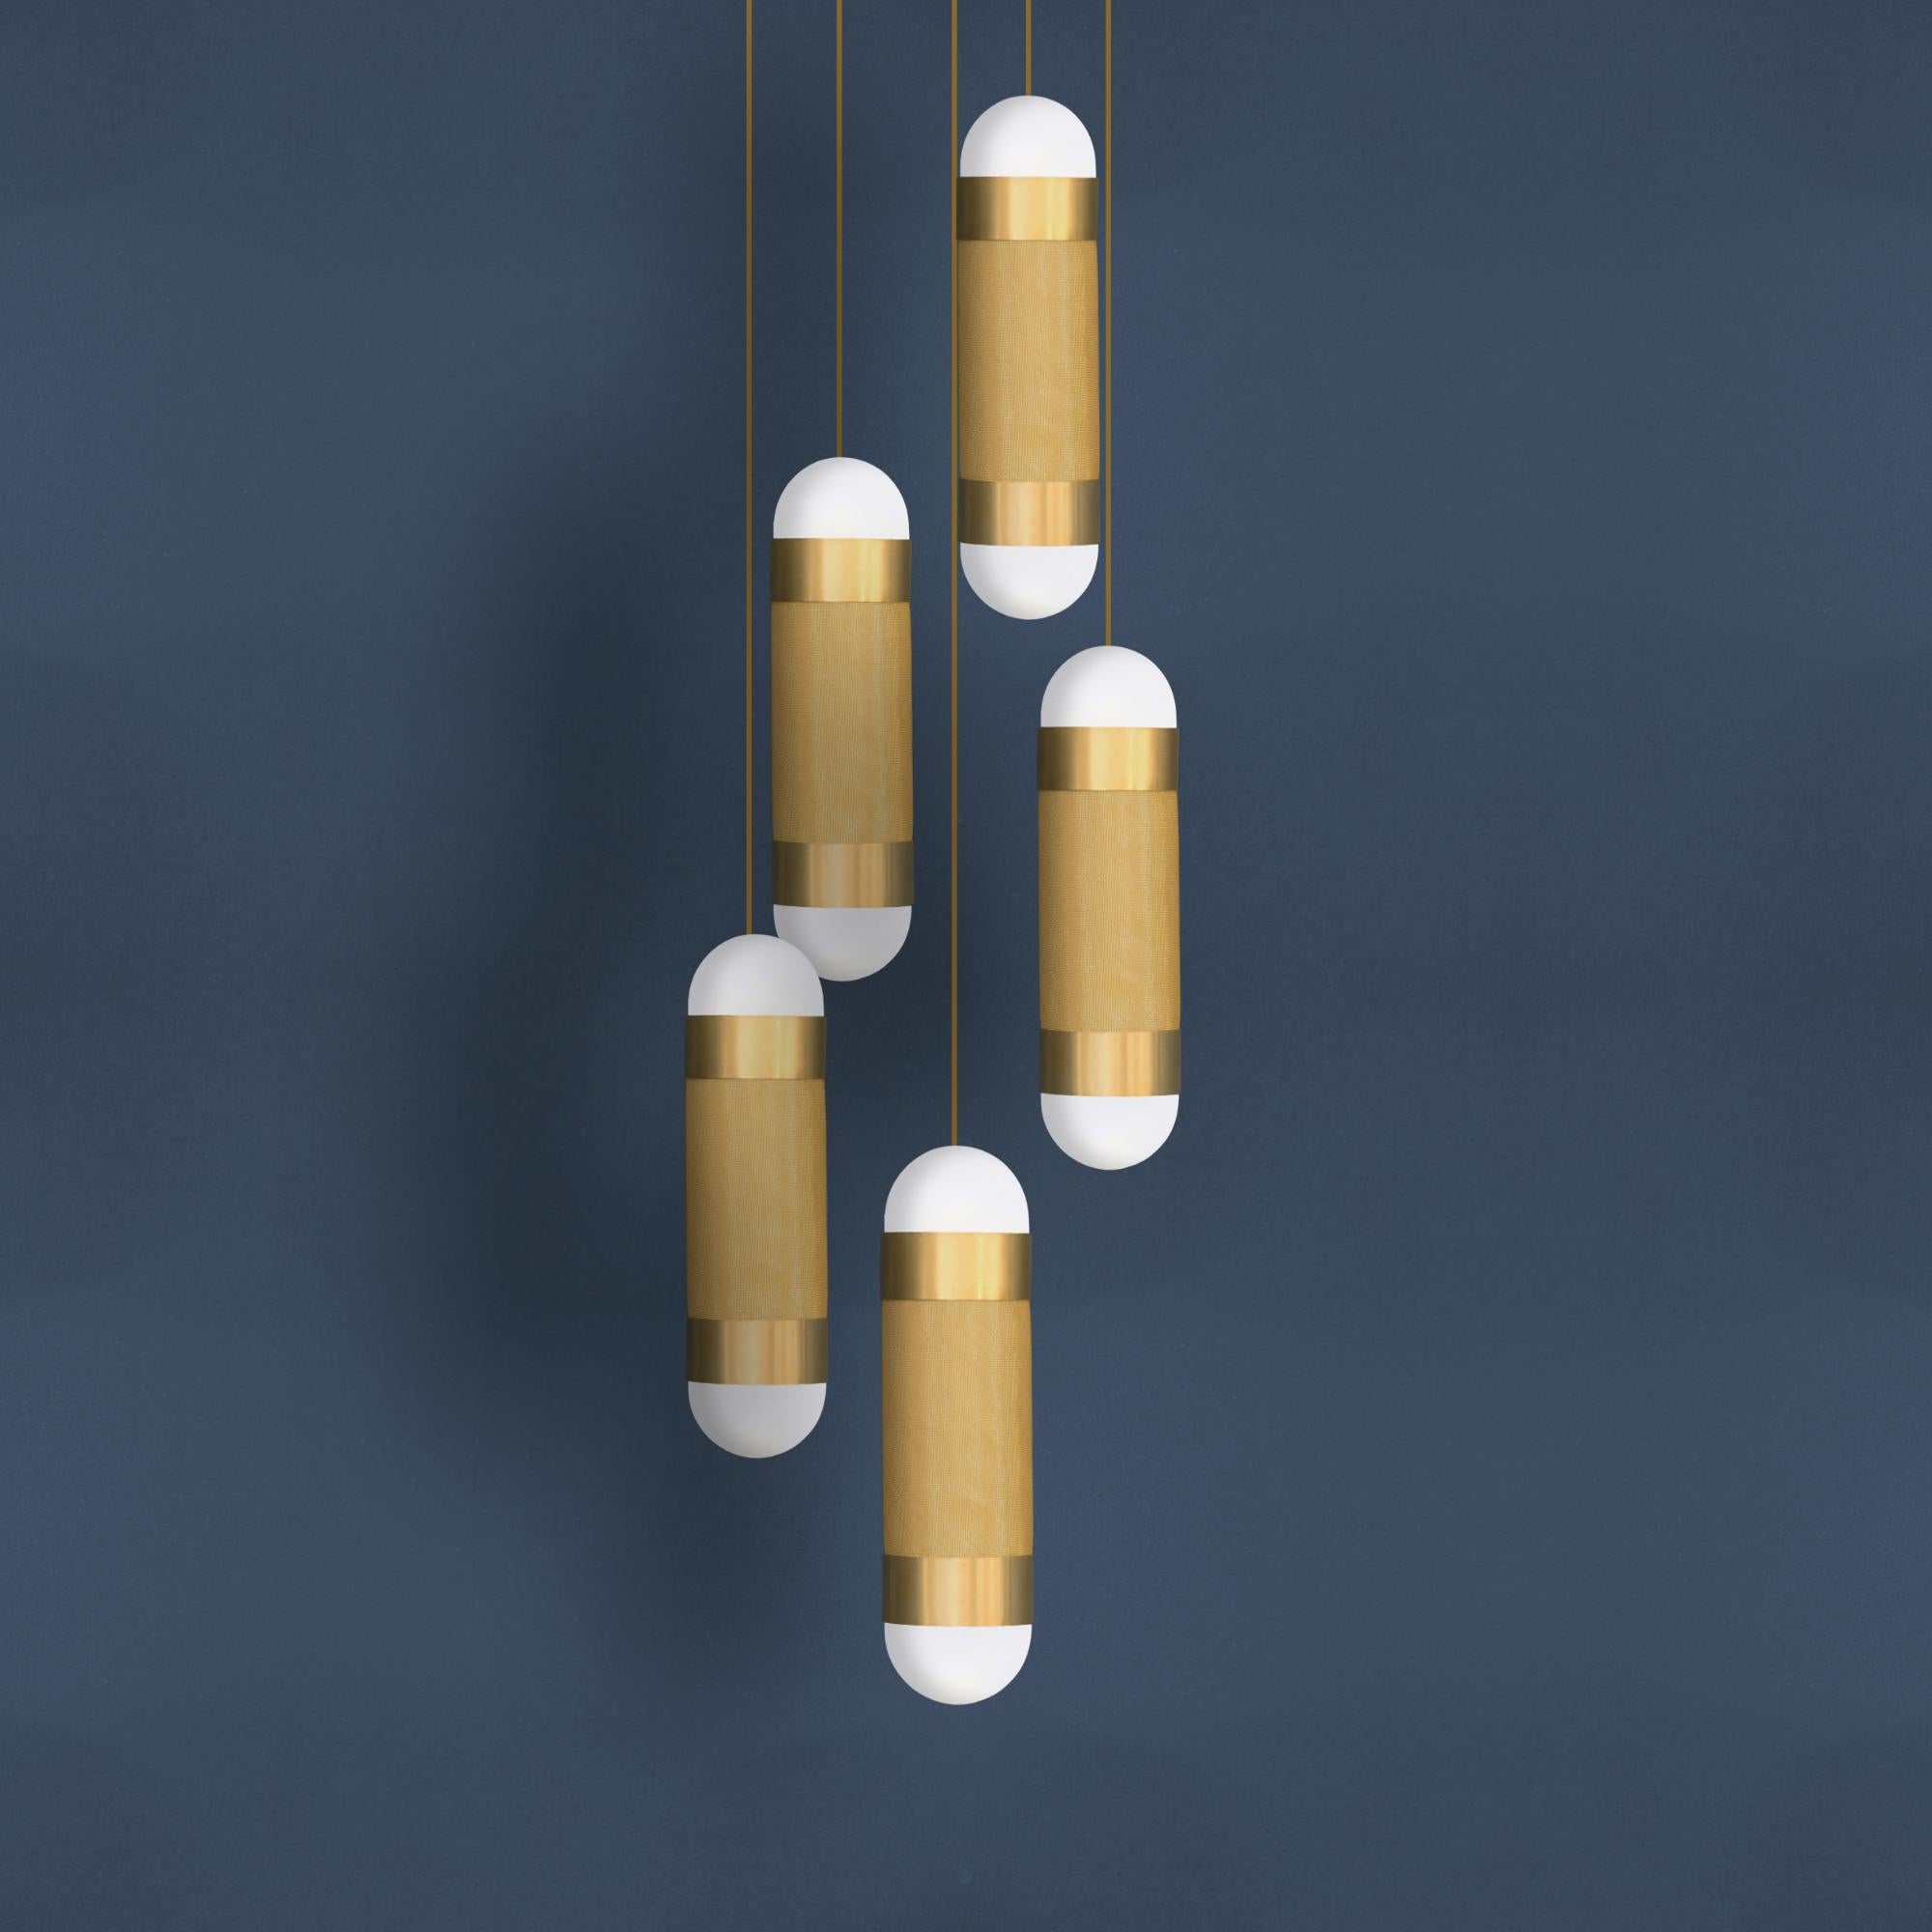 The LOOM 5 cascade pendant light is defined by its signature woven brass cylinder topped with hand-brushed brass sleeves and completed with soft-white borosilicate glass domes. When illuminated the LOOM emanates a soft, warm glow through the brass